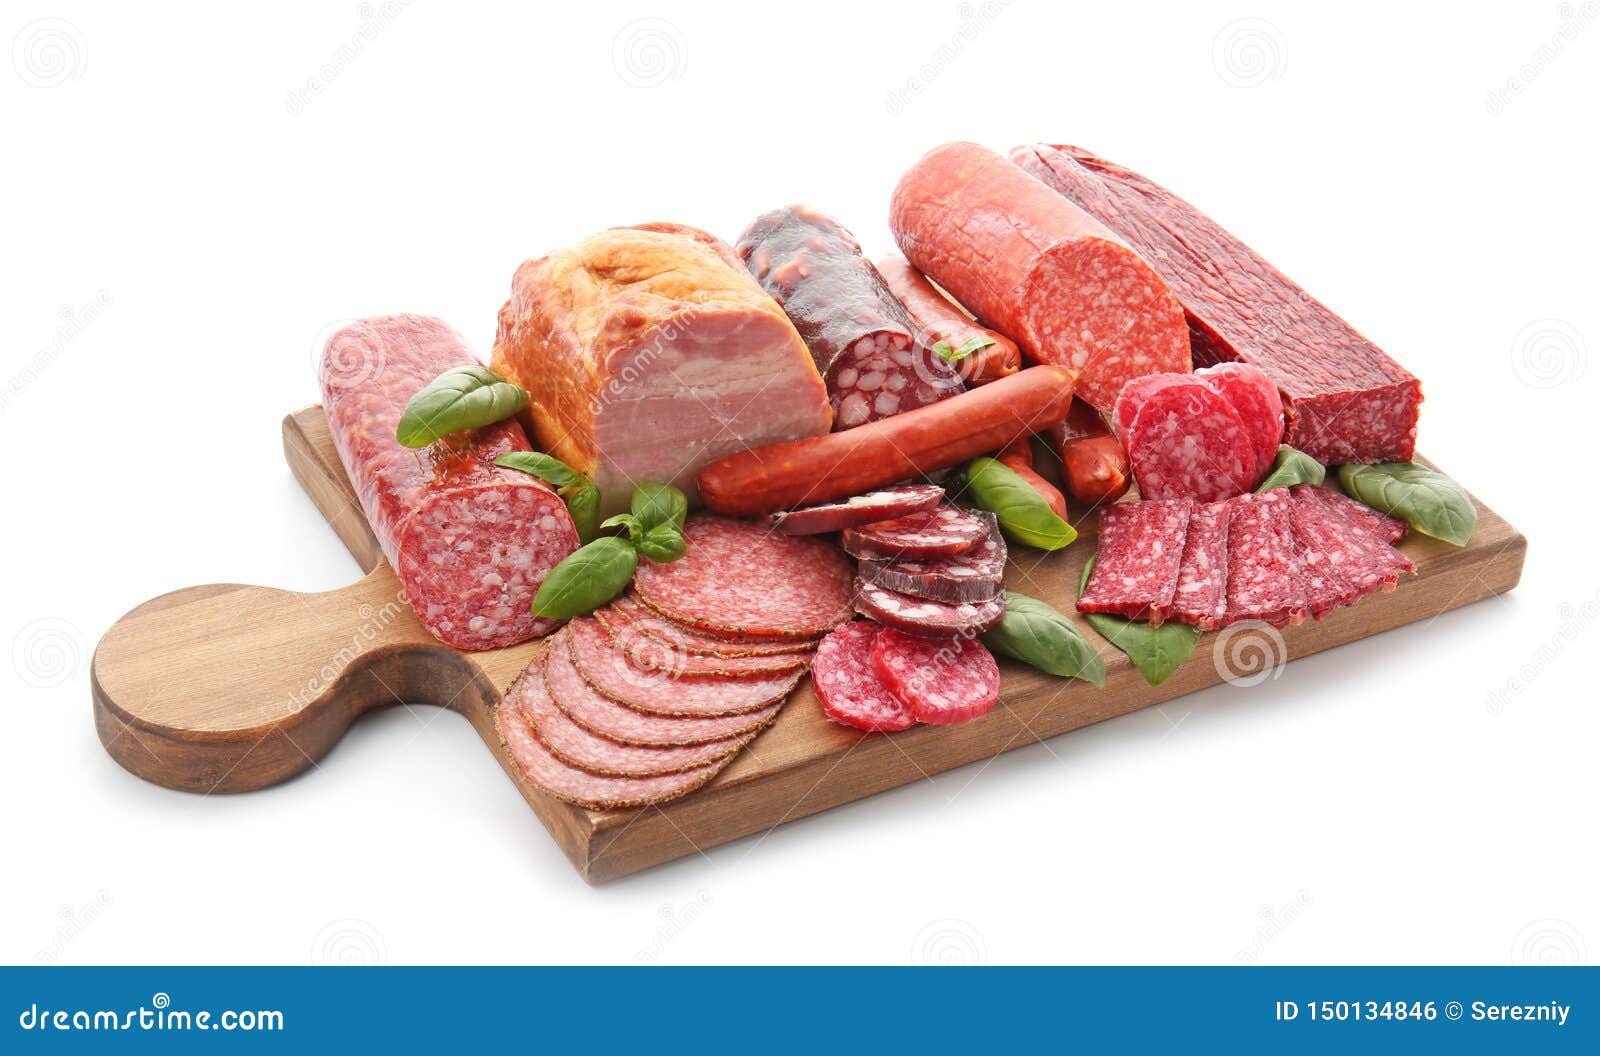 assortment of delicious deli meats on wooden board,  on white